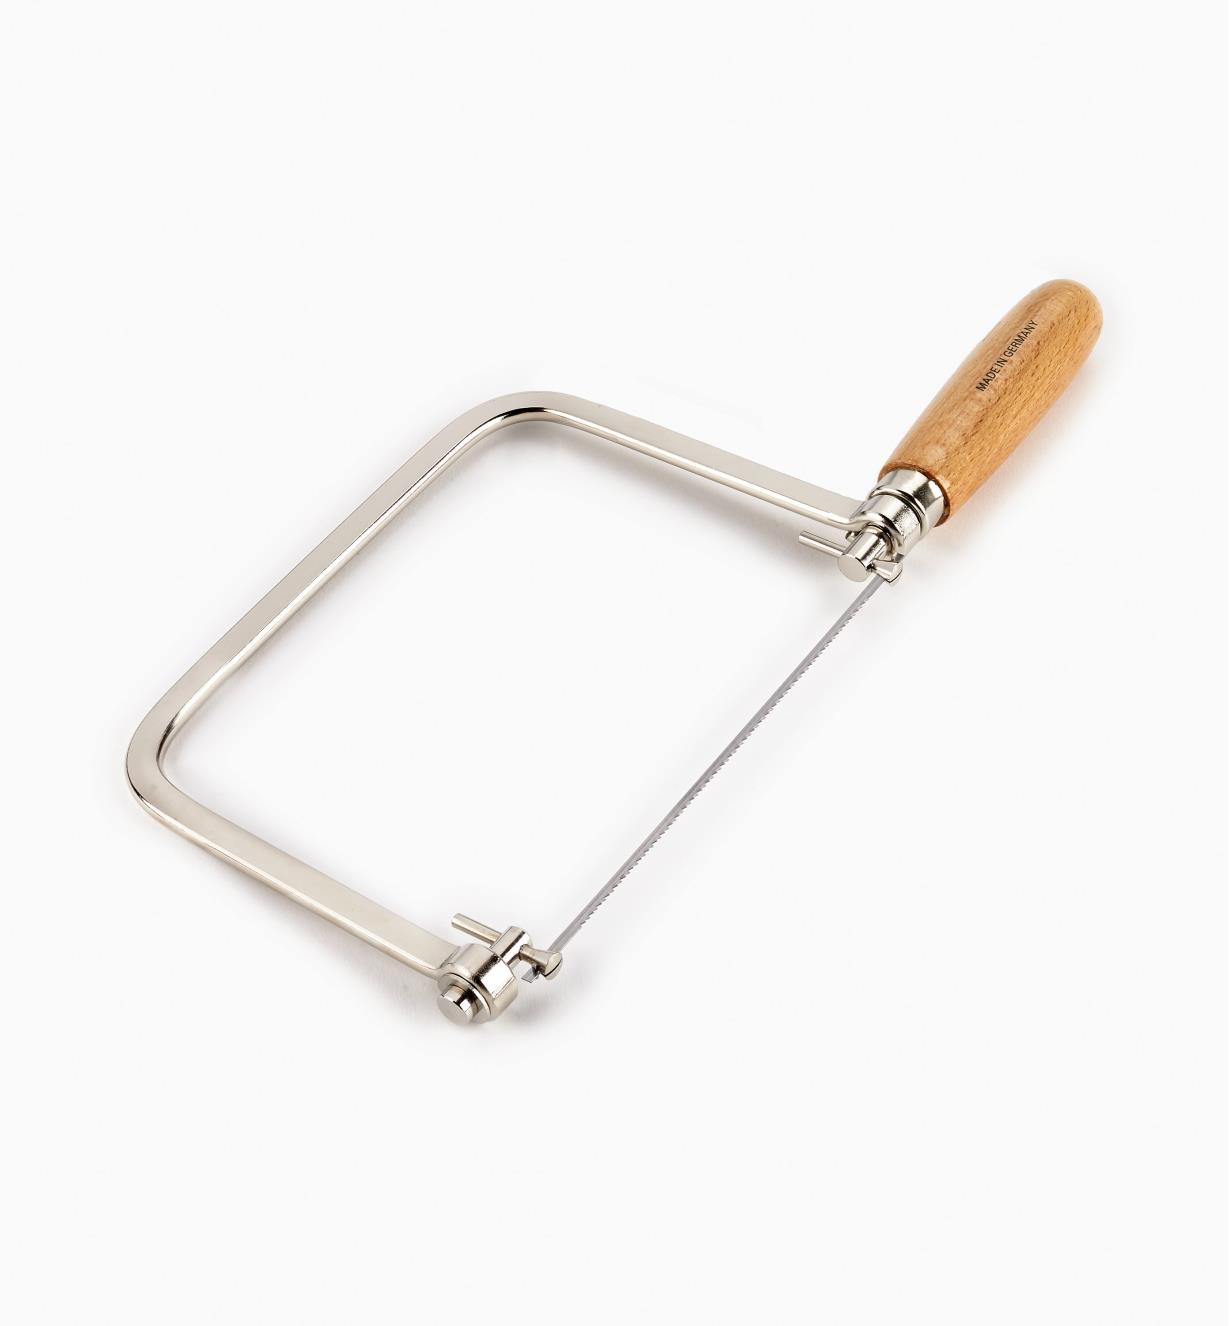 02T1001 - Coping Saw & Blade